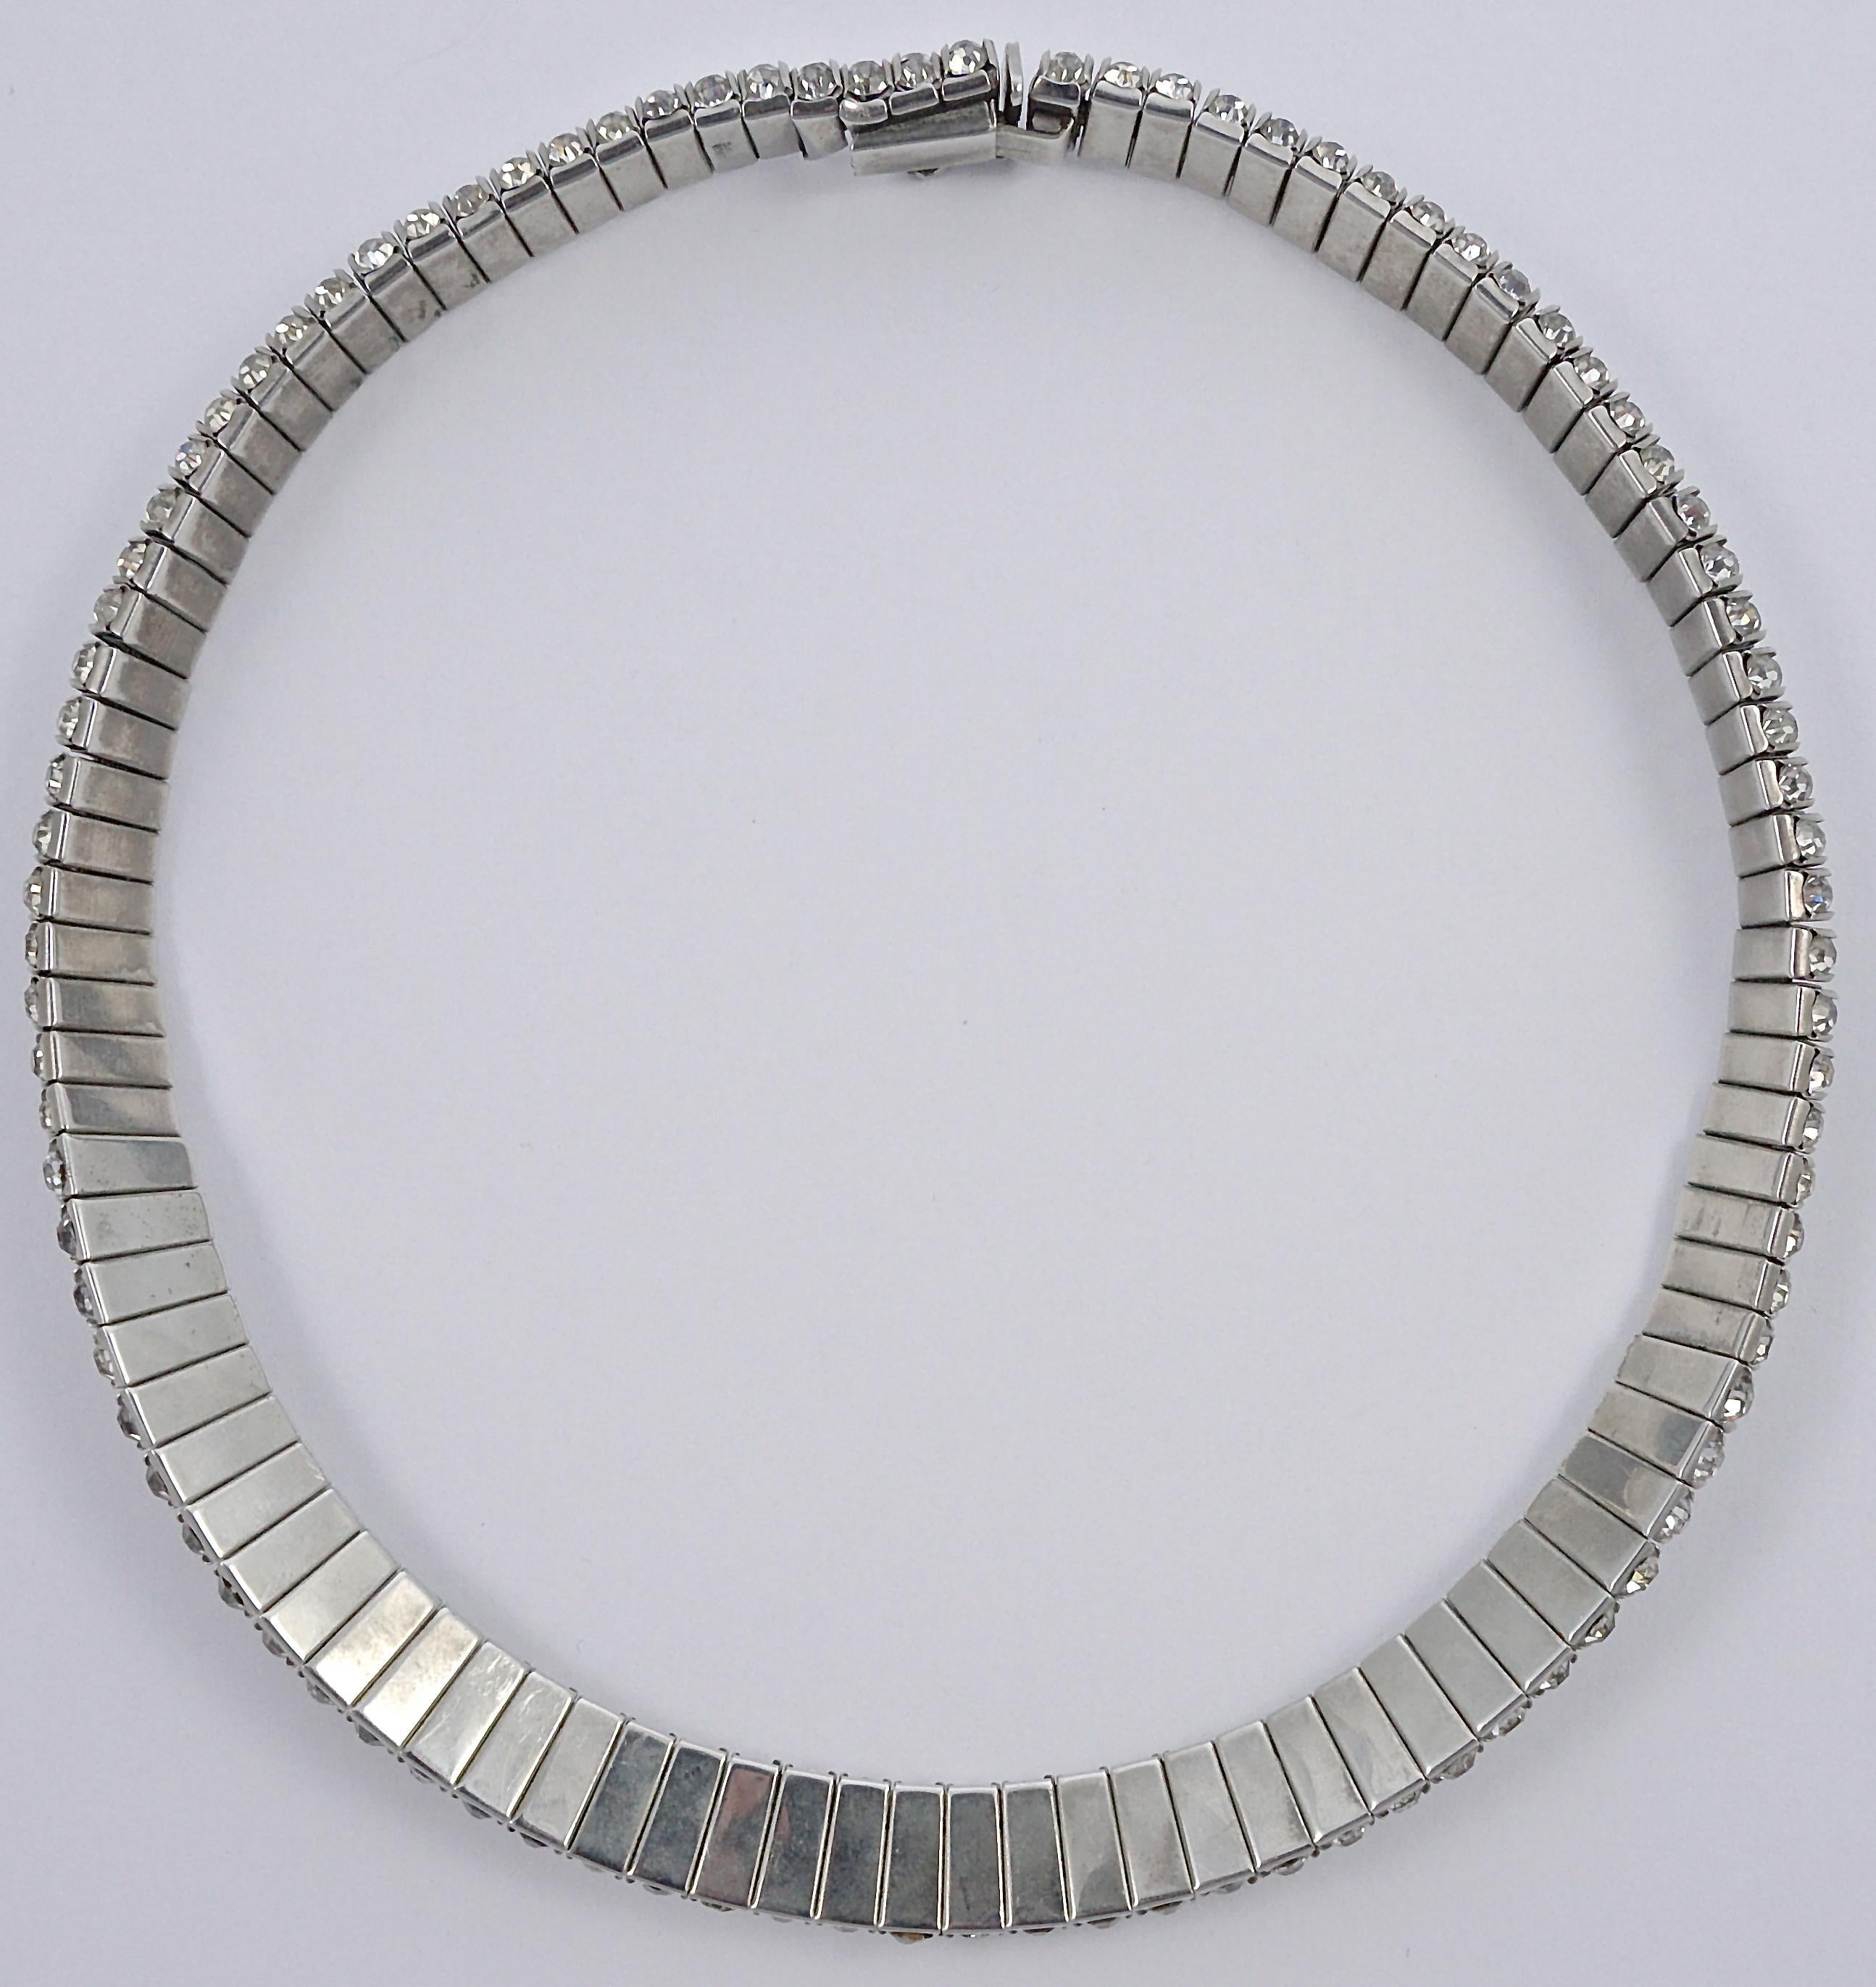 Stylish DRGM Art Deco silver tone necklace featuring channel set rhinestones. There are four sparkling rhinestones making up each link. Length 39.5cm / 15.55 inches by width 1cm / .39 inch. The clasp works well and has a safety catch. This fabulous